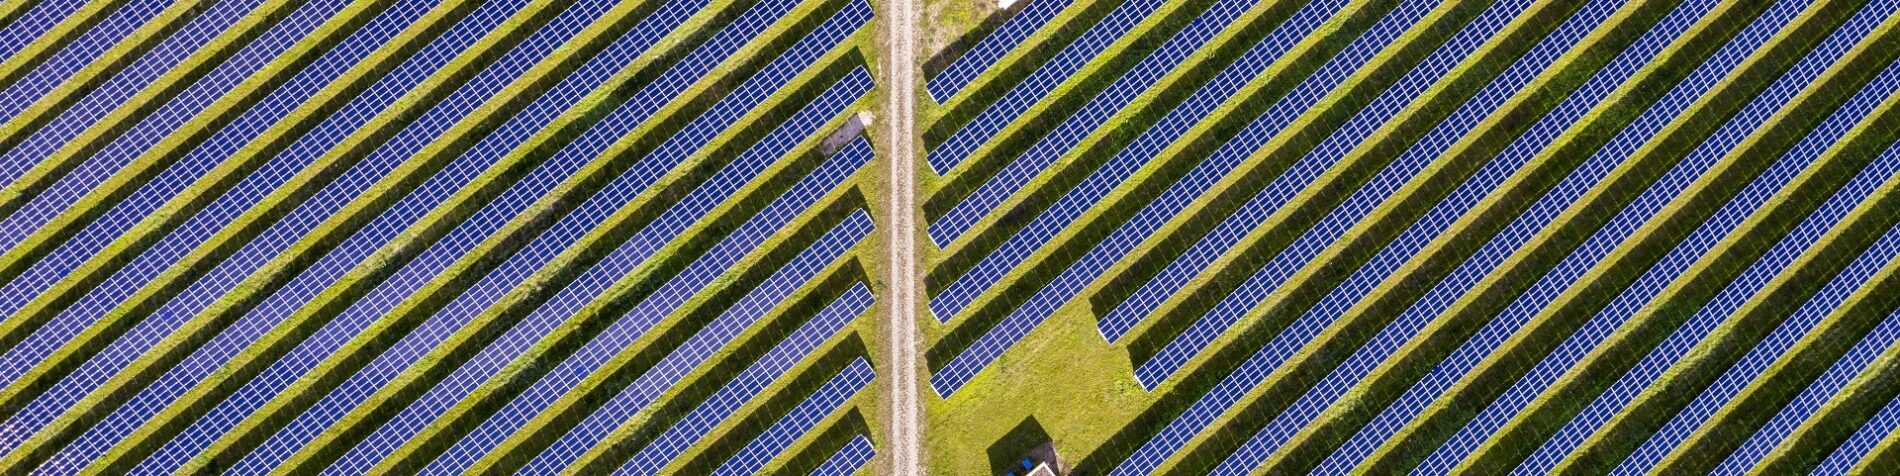 The Take: Solar Power Generation Is Booming in the U.S.